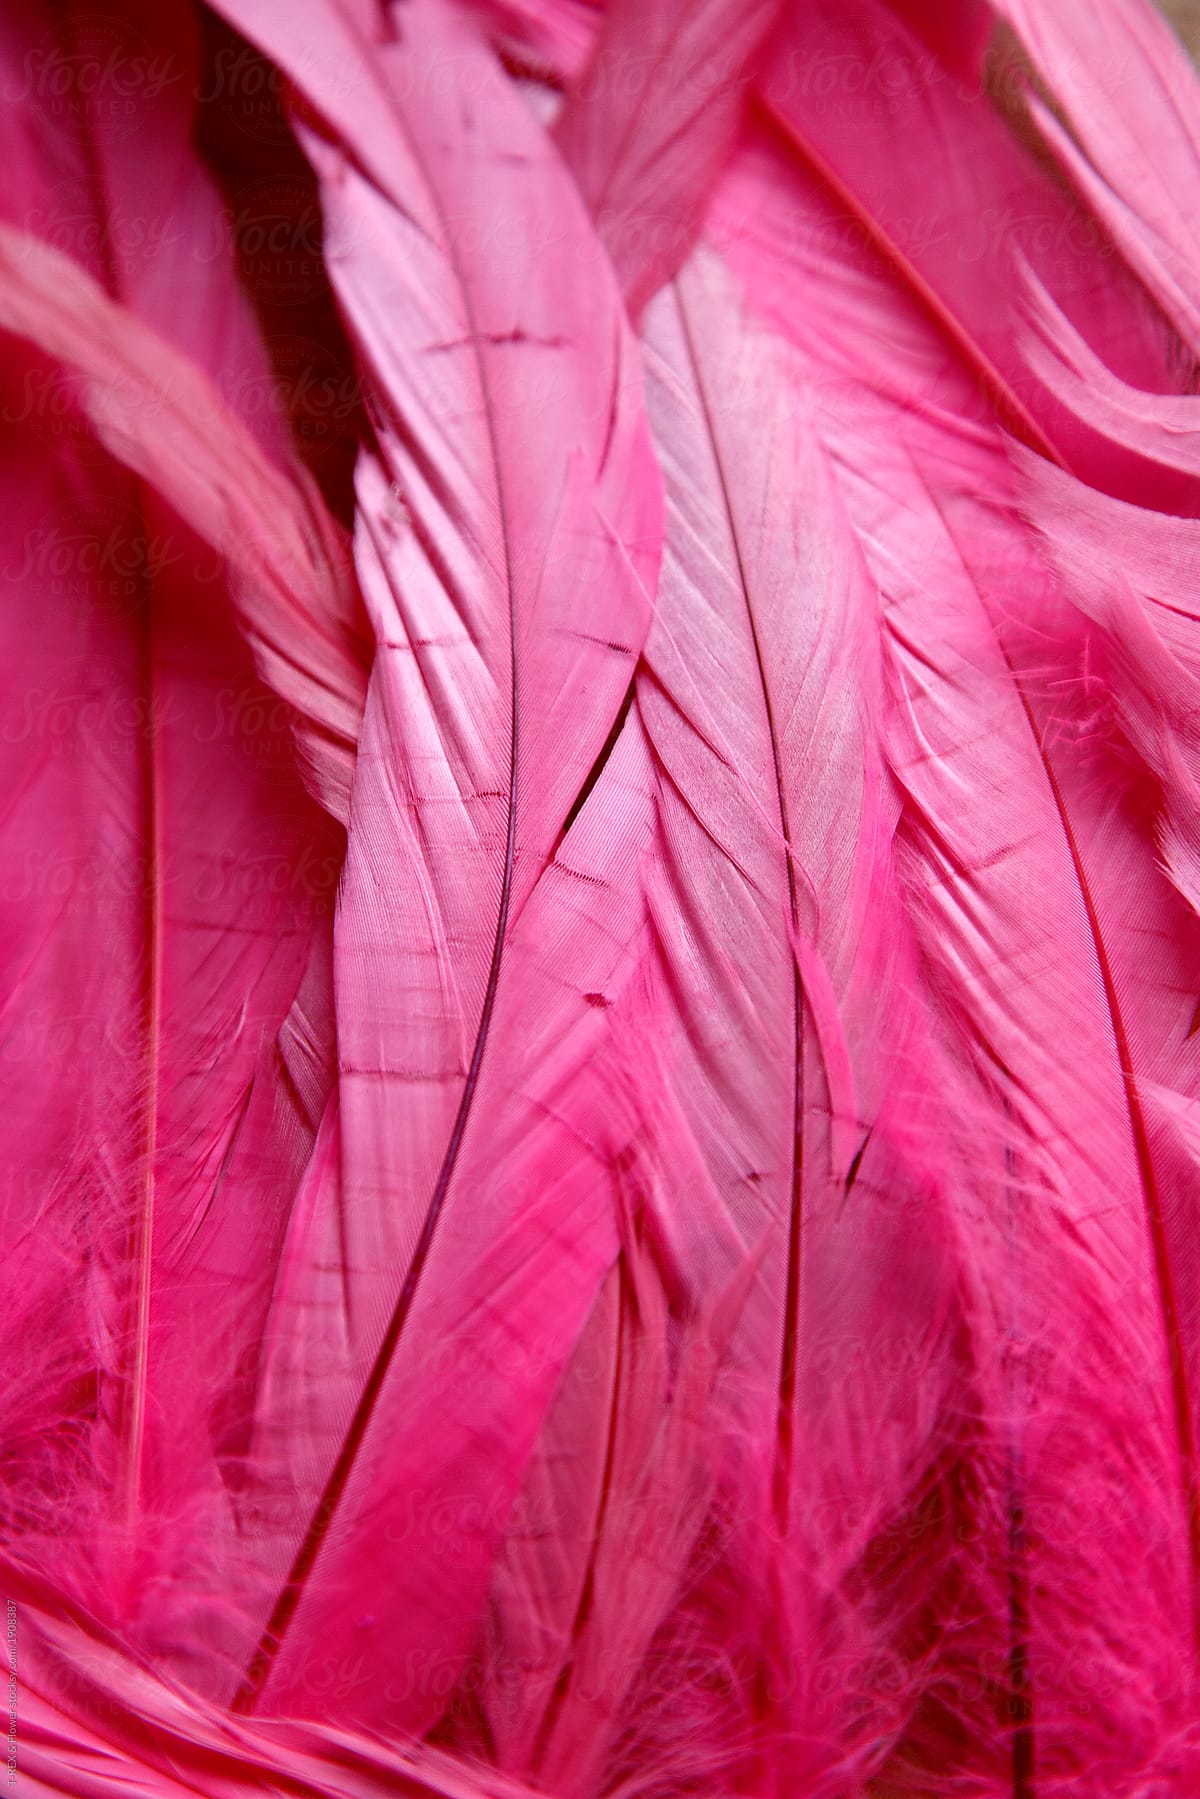 Close-up Texture Of Pink Feathers by Stocksy Contributor Danil Nevsky -  Stocksy